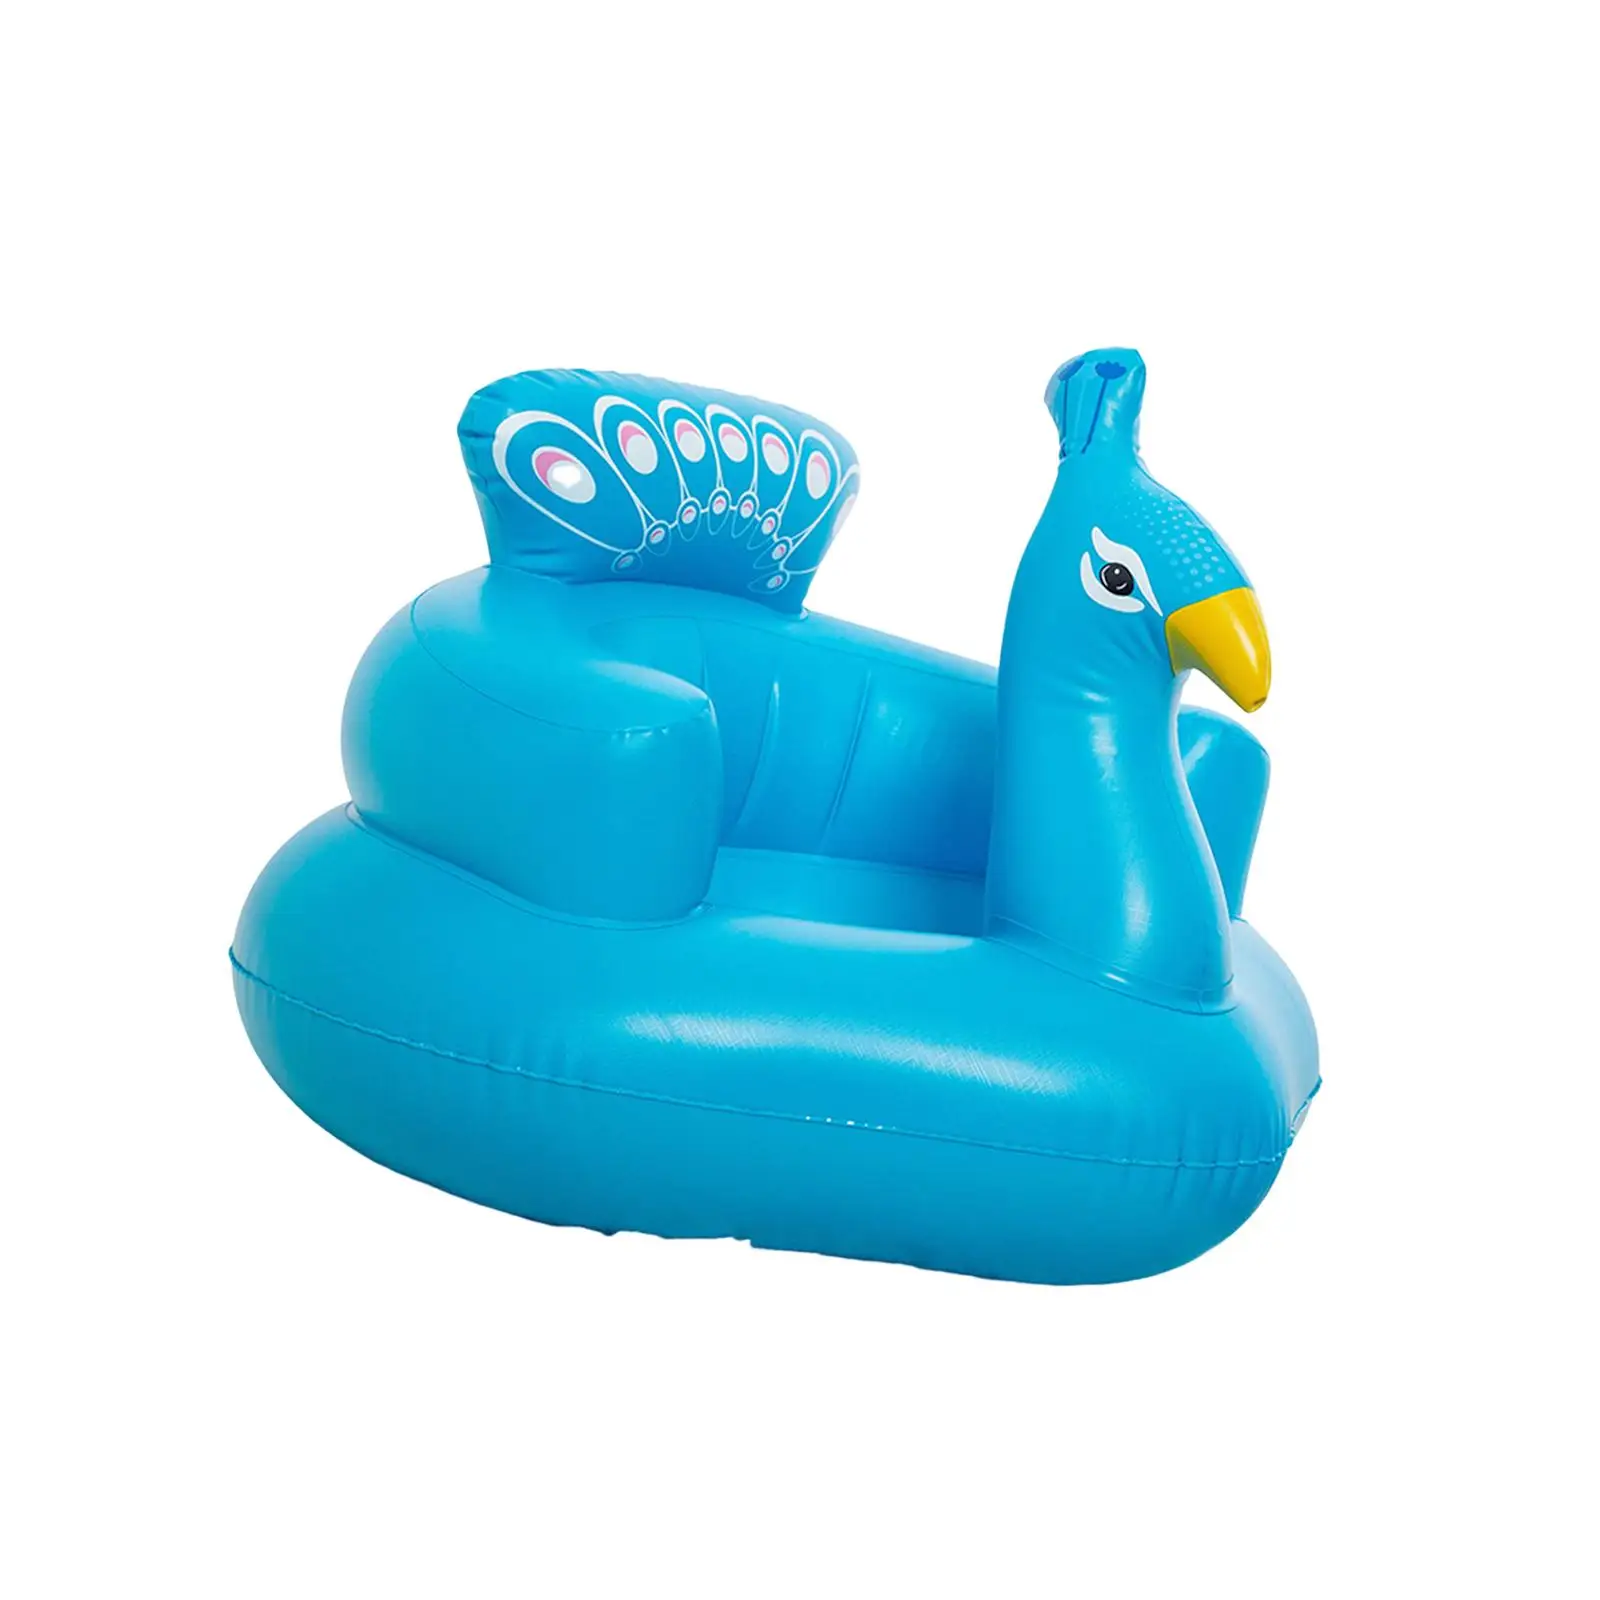 Inflation Baby Chair Seat Floor Seat Baby Shower Chair Floor Seater Infant Support Seat Pool Water toy Shower Chair